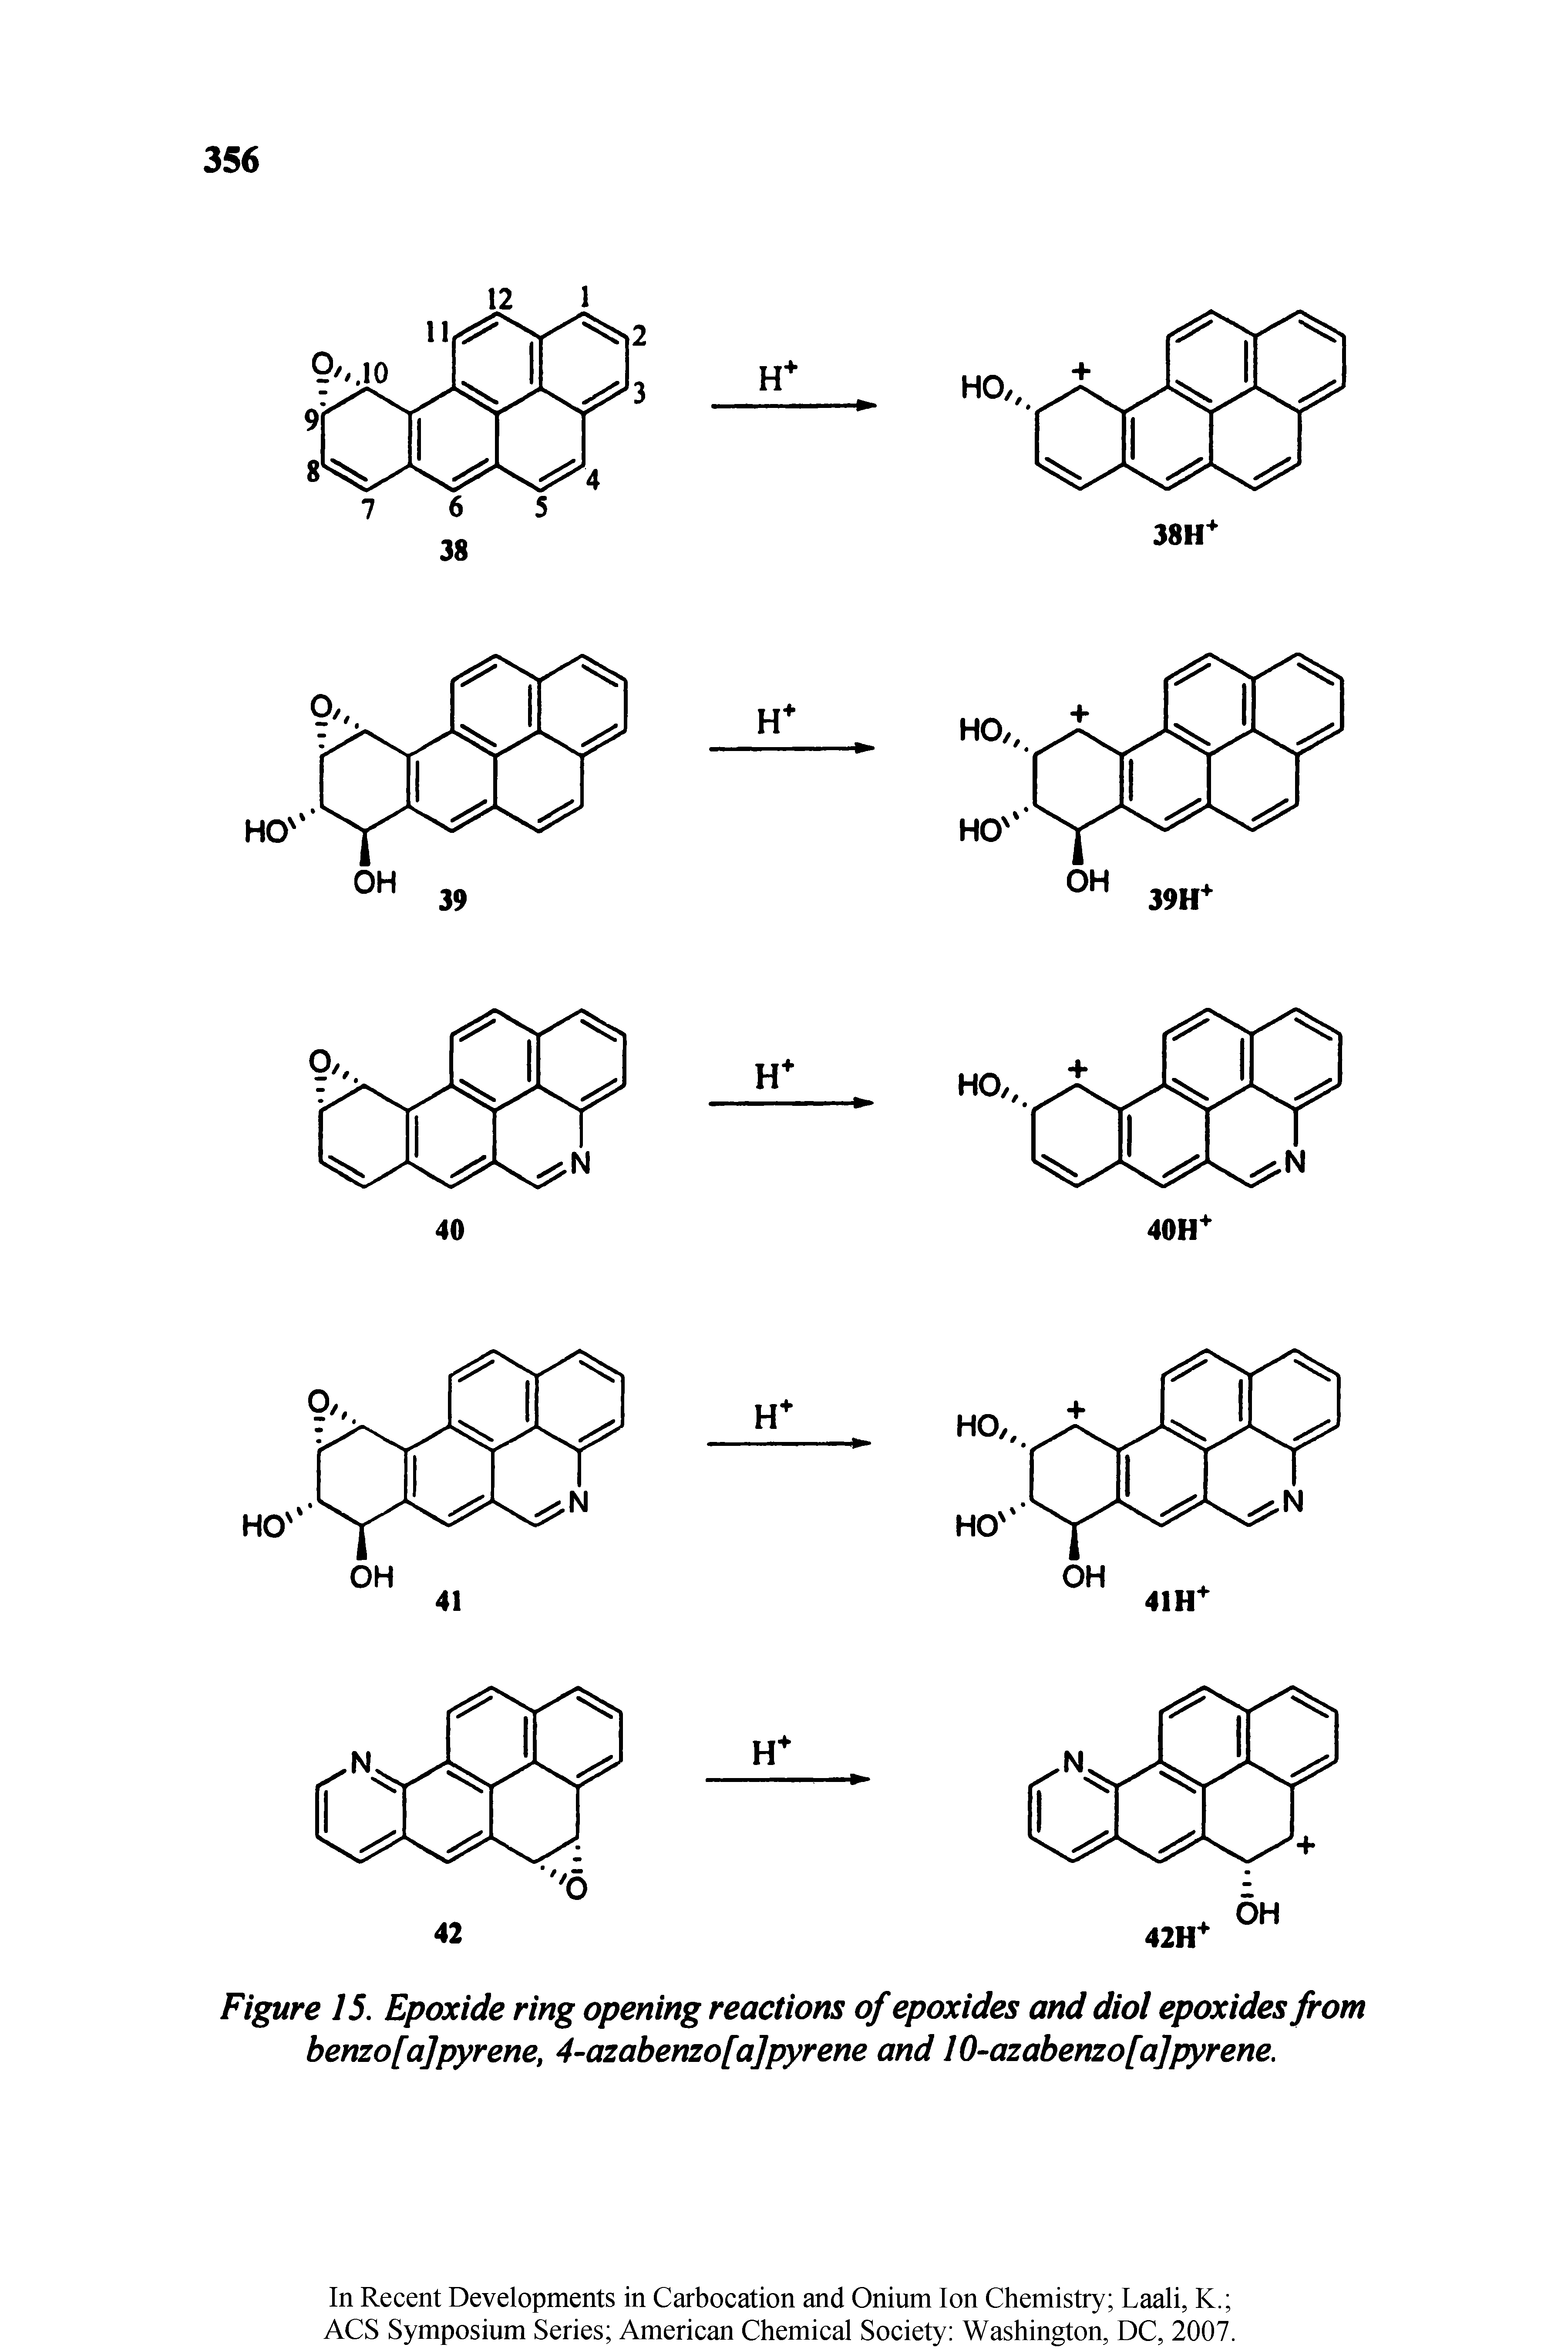 Figure 15. Epoxide ring opening reactions of epoxides and diol epoxides from benzo[a]pyrene, 4-azabenzo[a]pyrene and 10-azabenzo [a]pyrene.